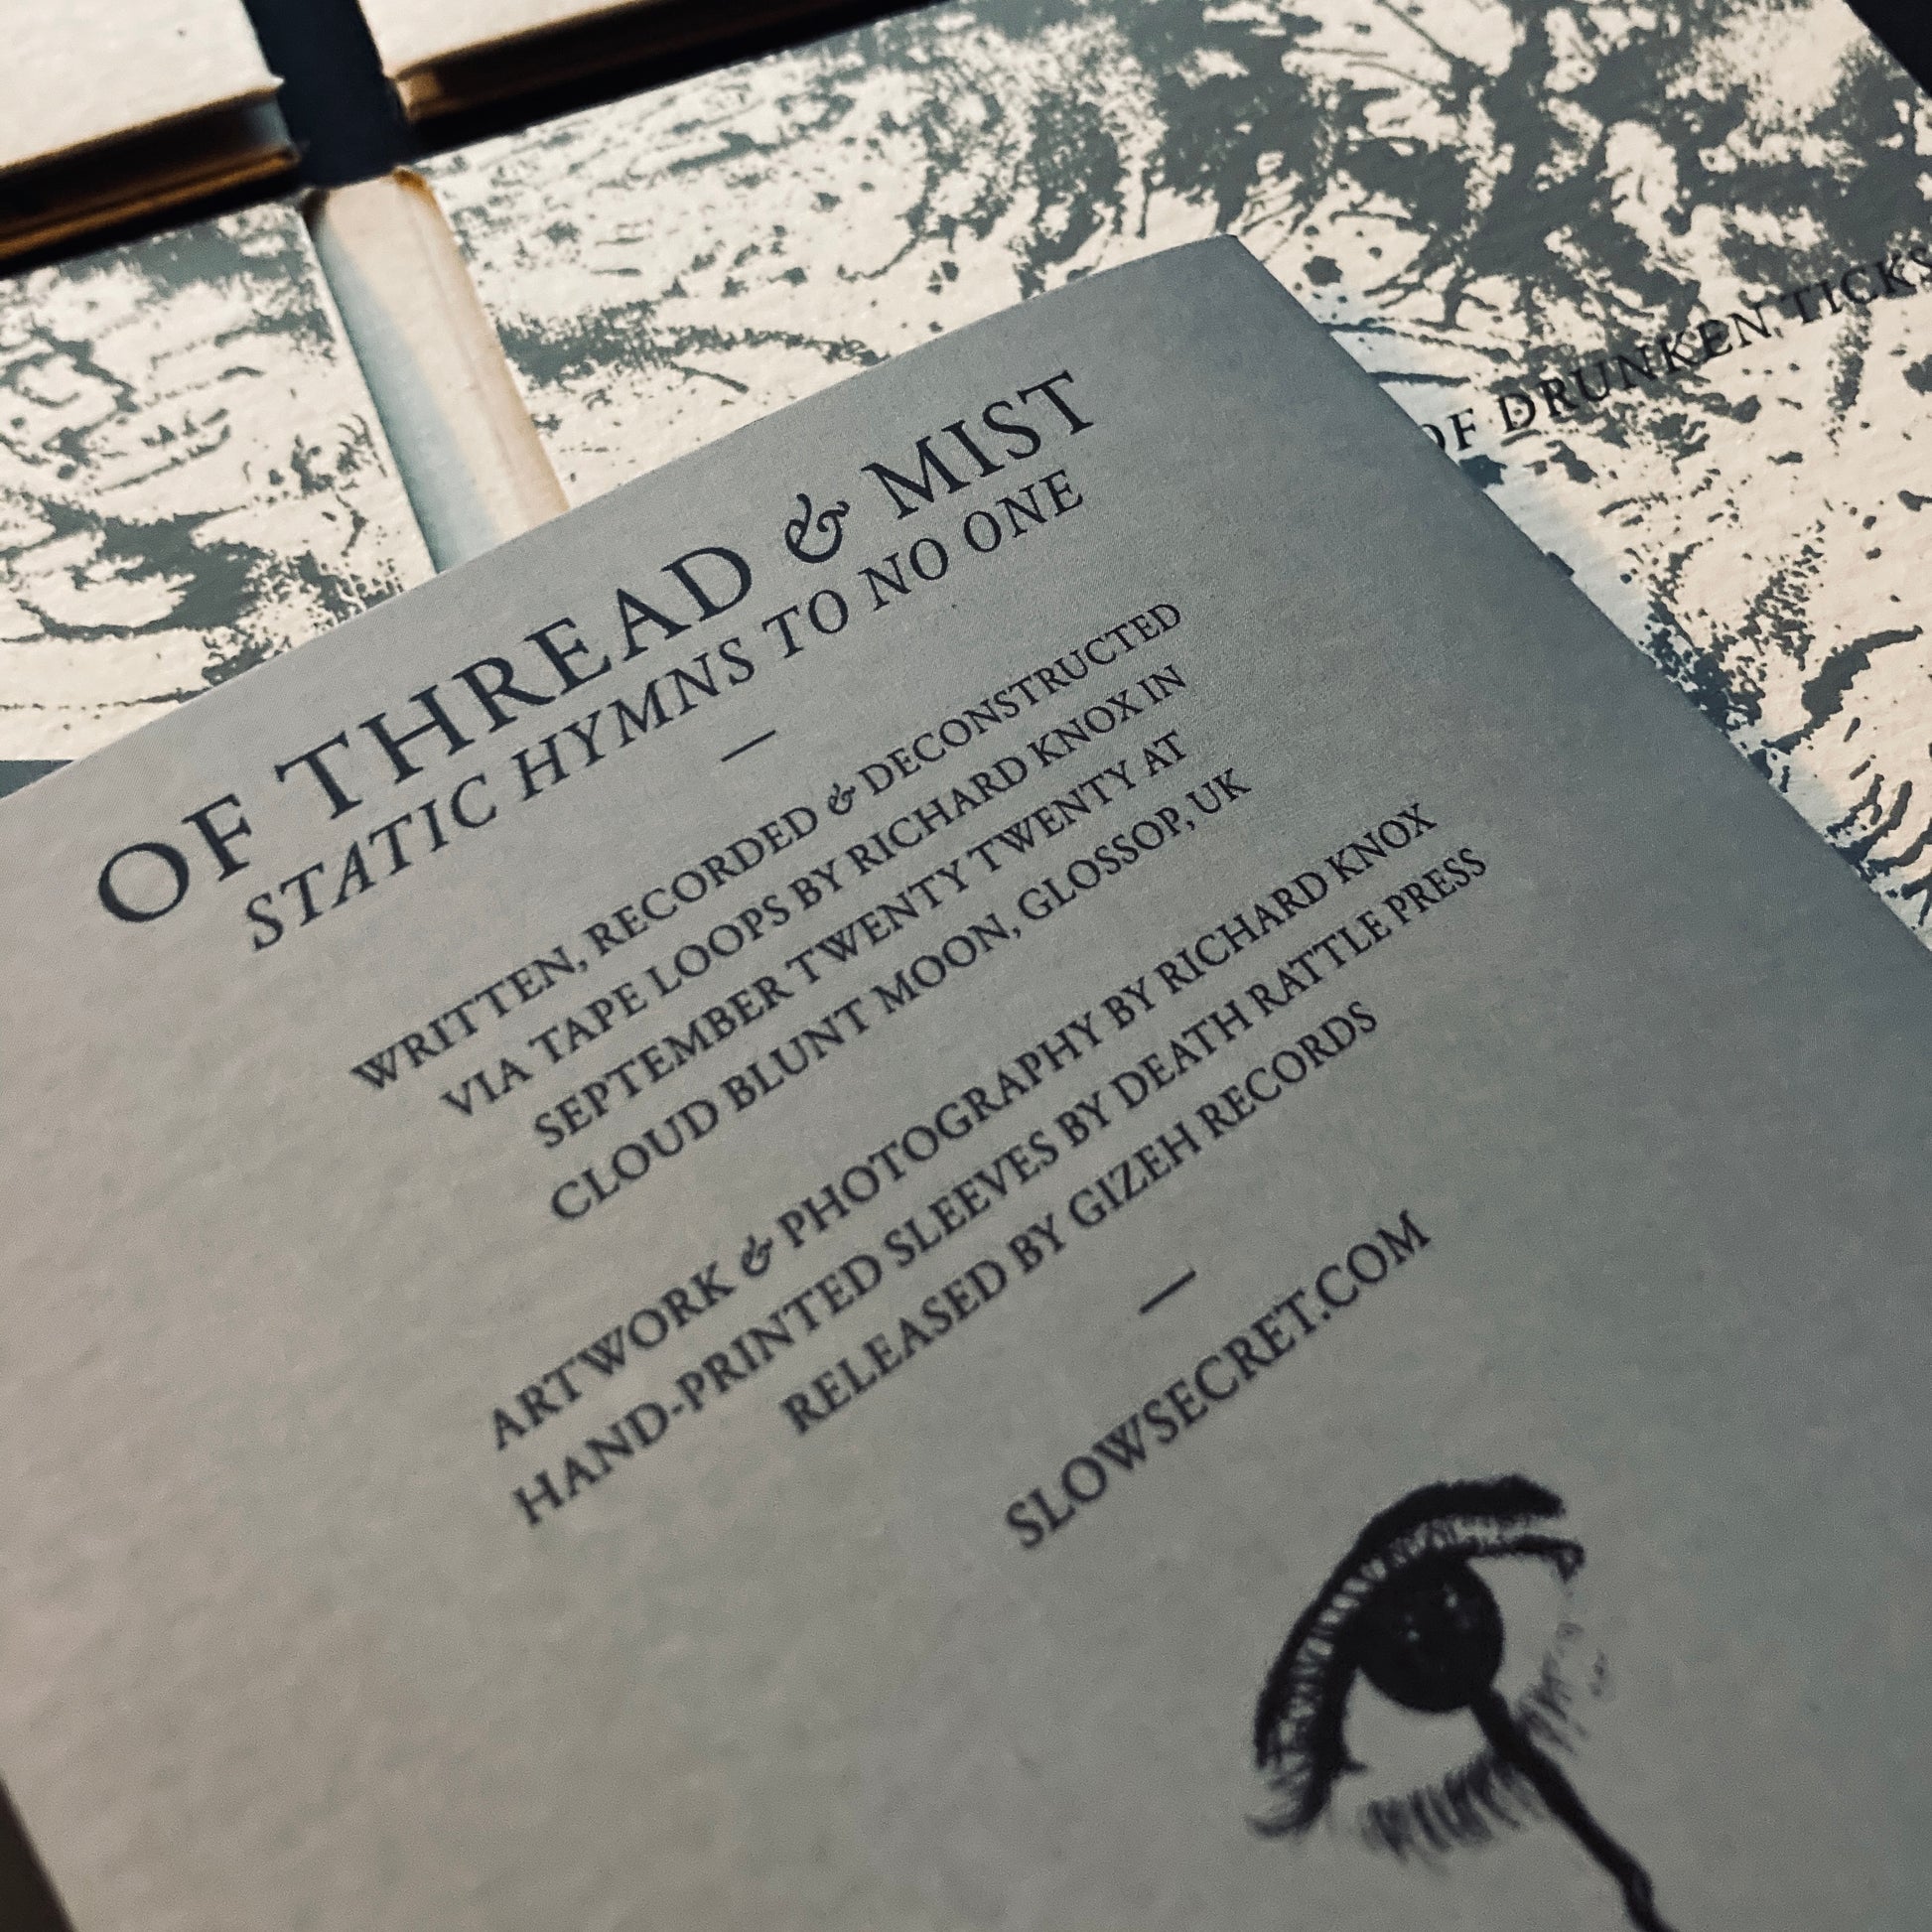 Of Thread & Mist — Static Hymns to No One — Gizeh Records